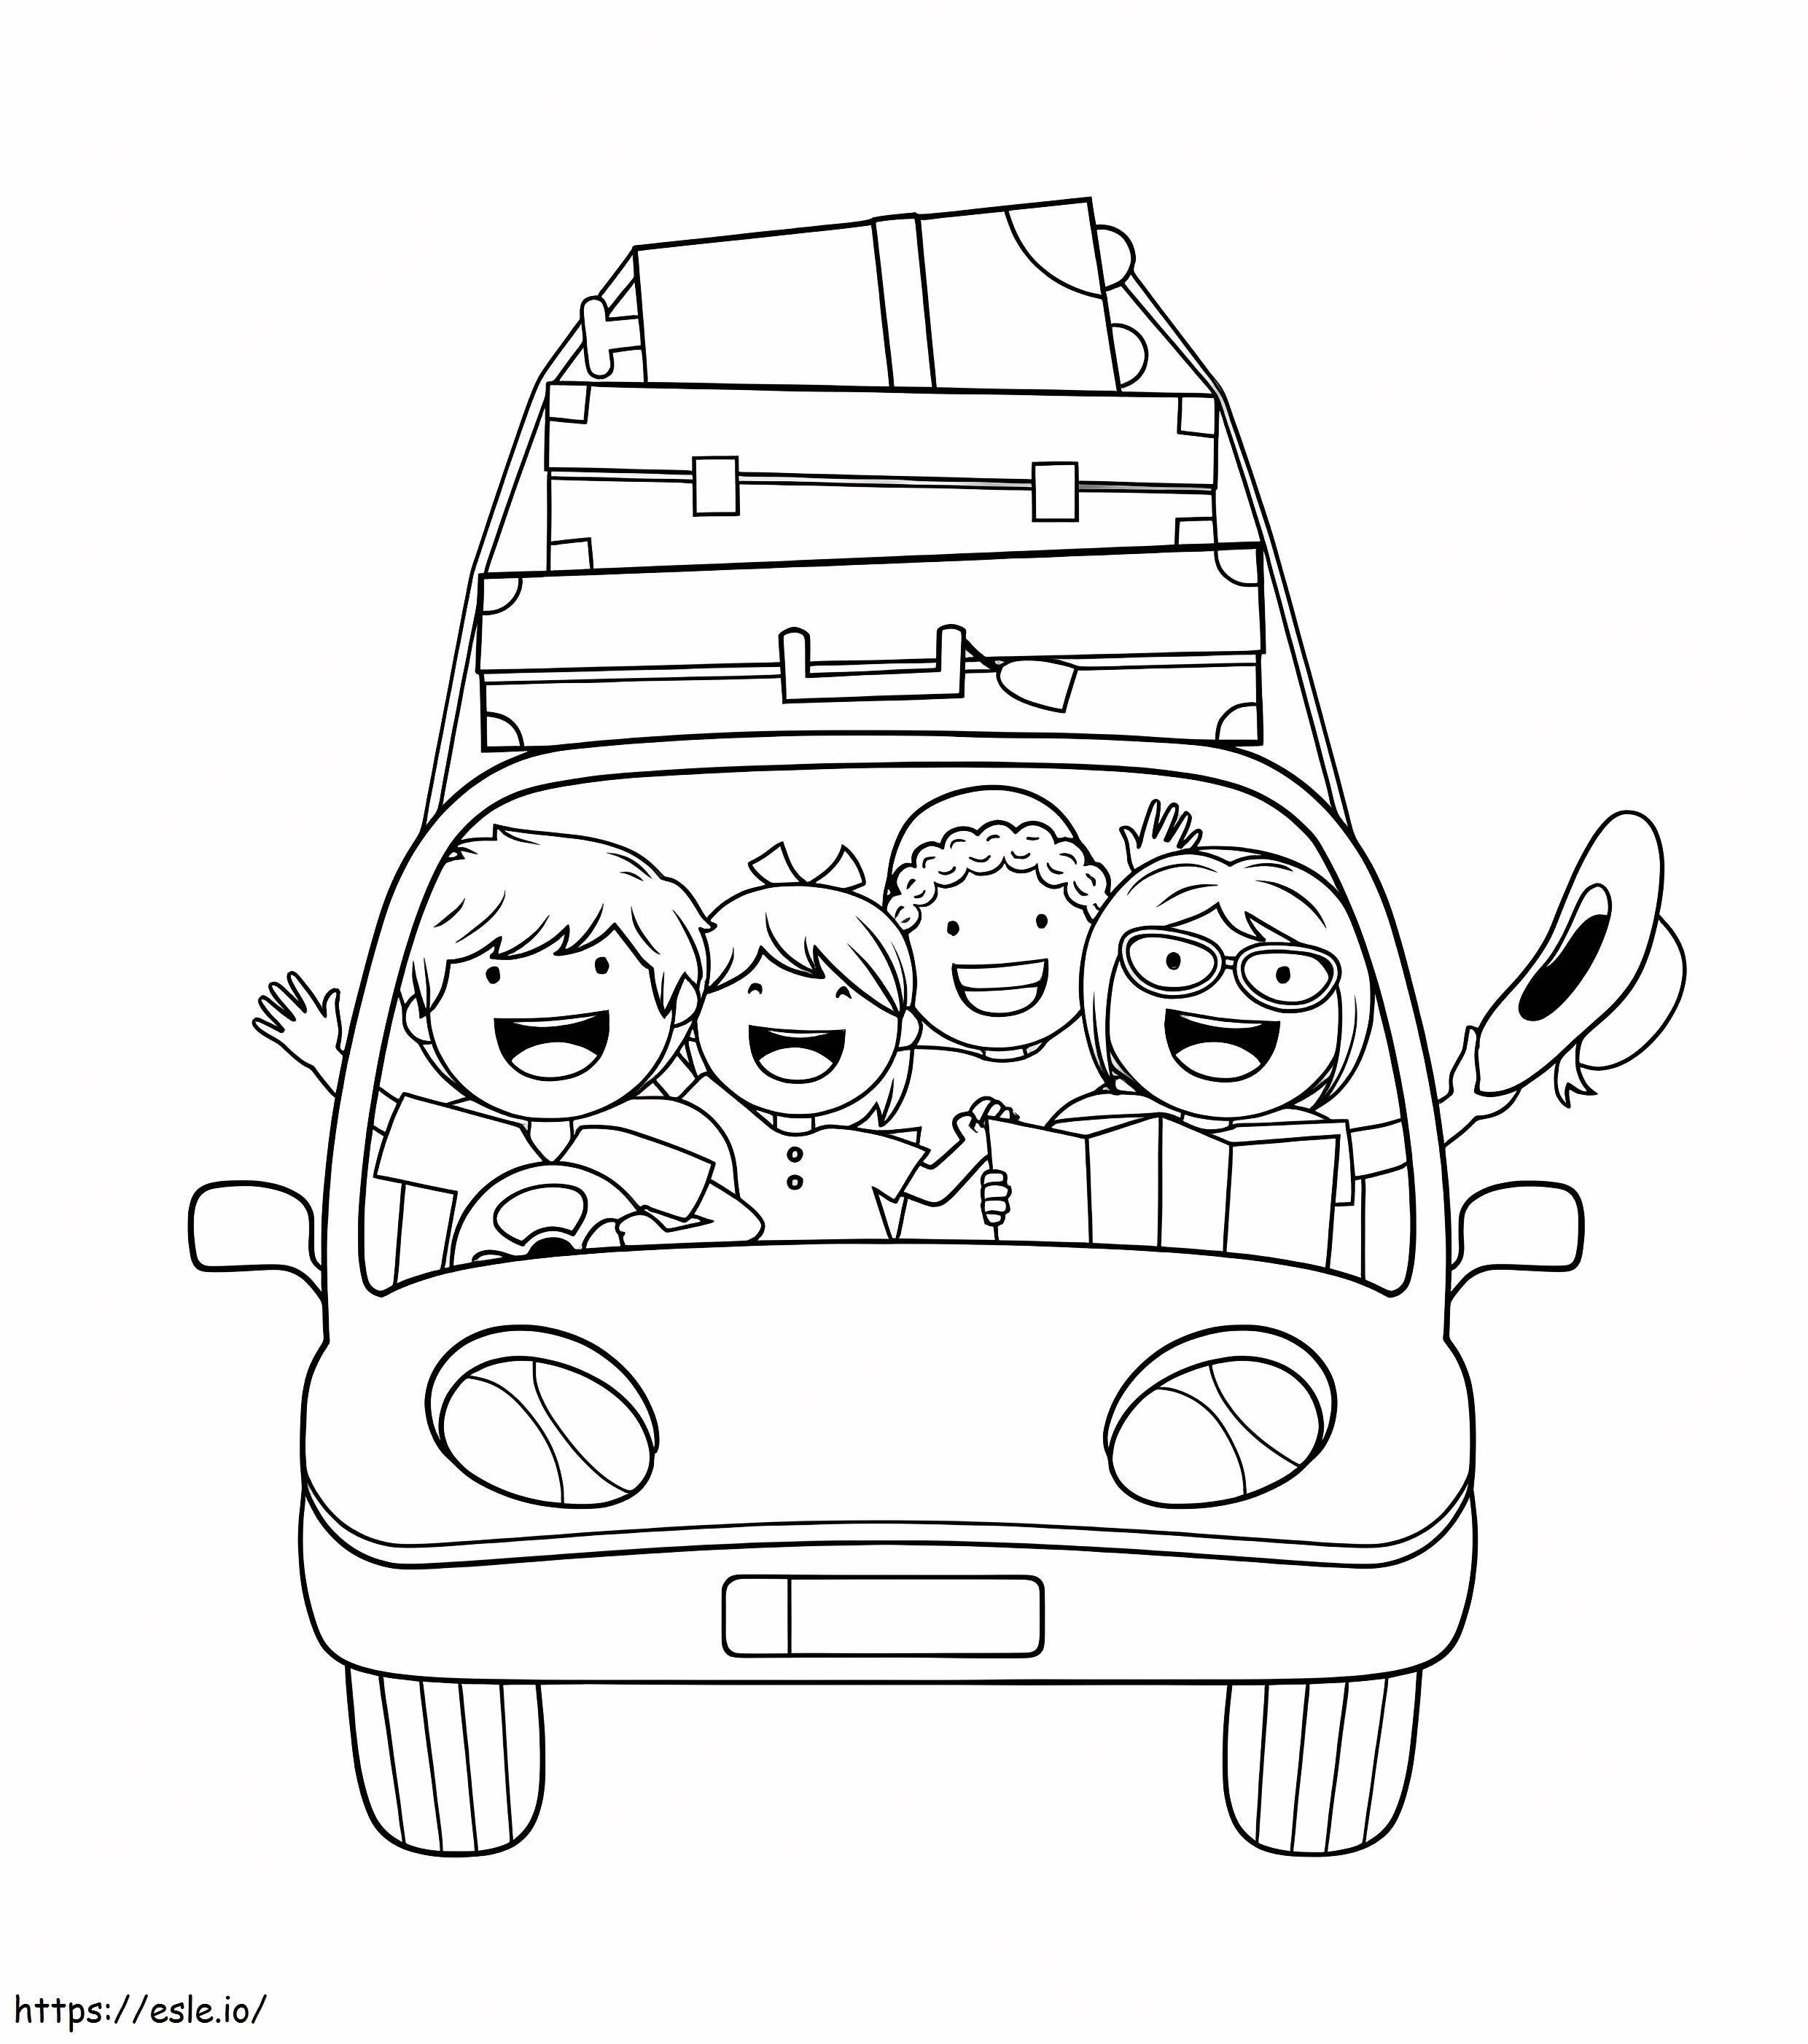 Travel Family coloring page